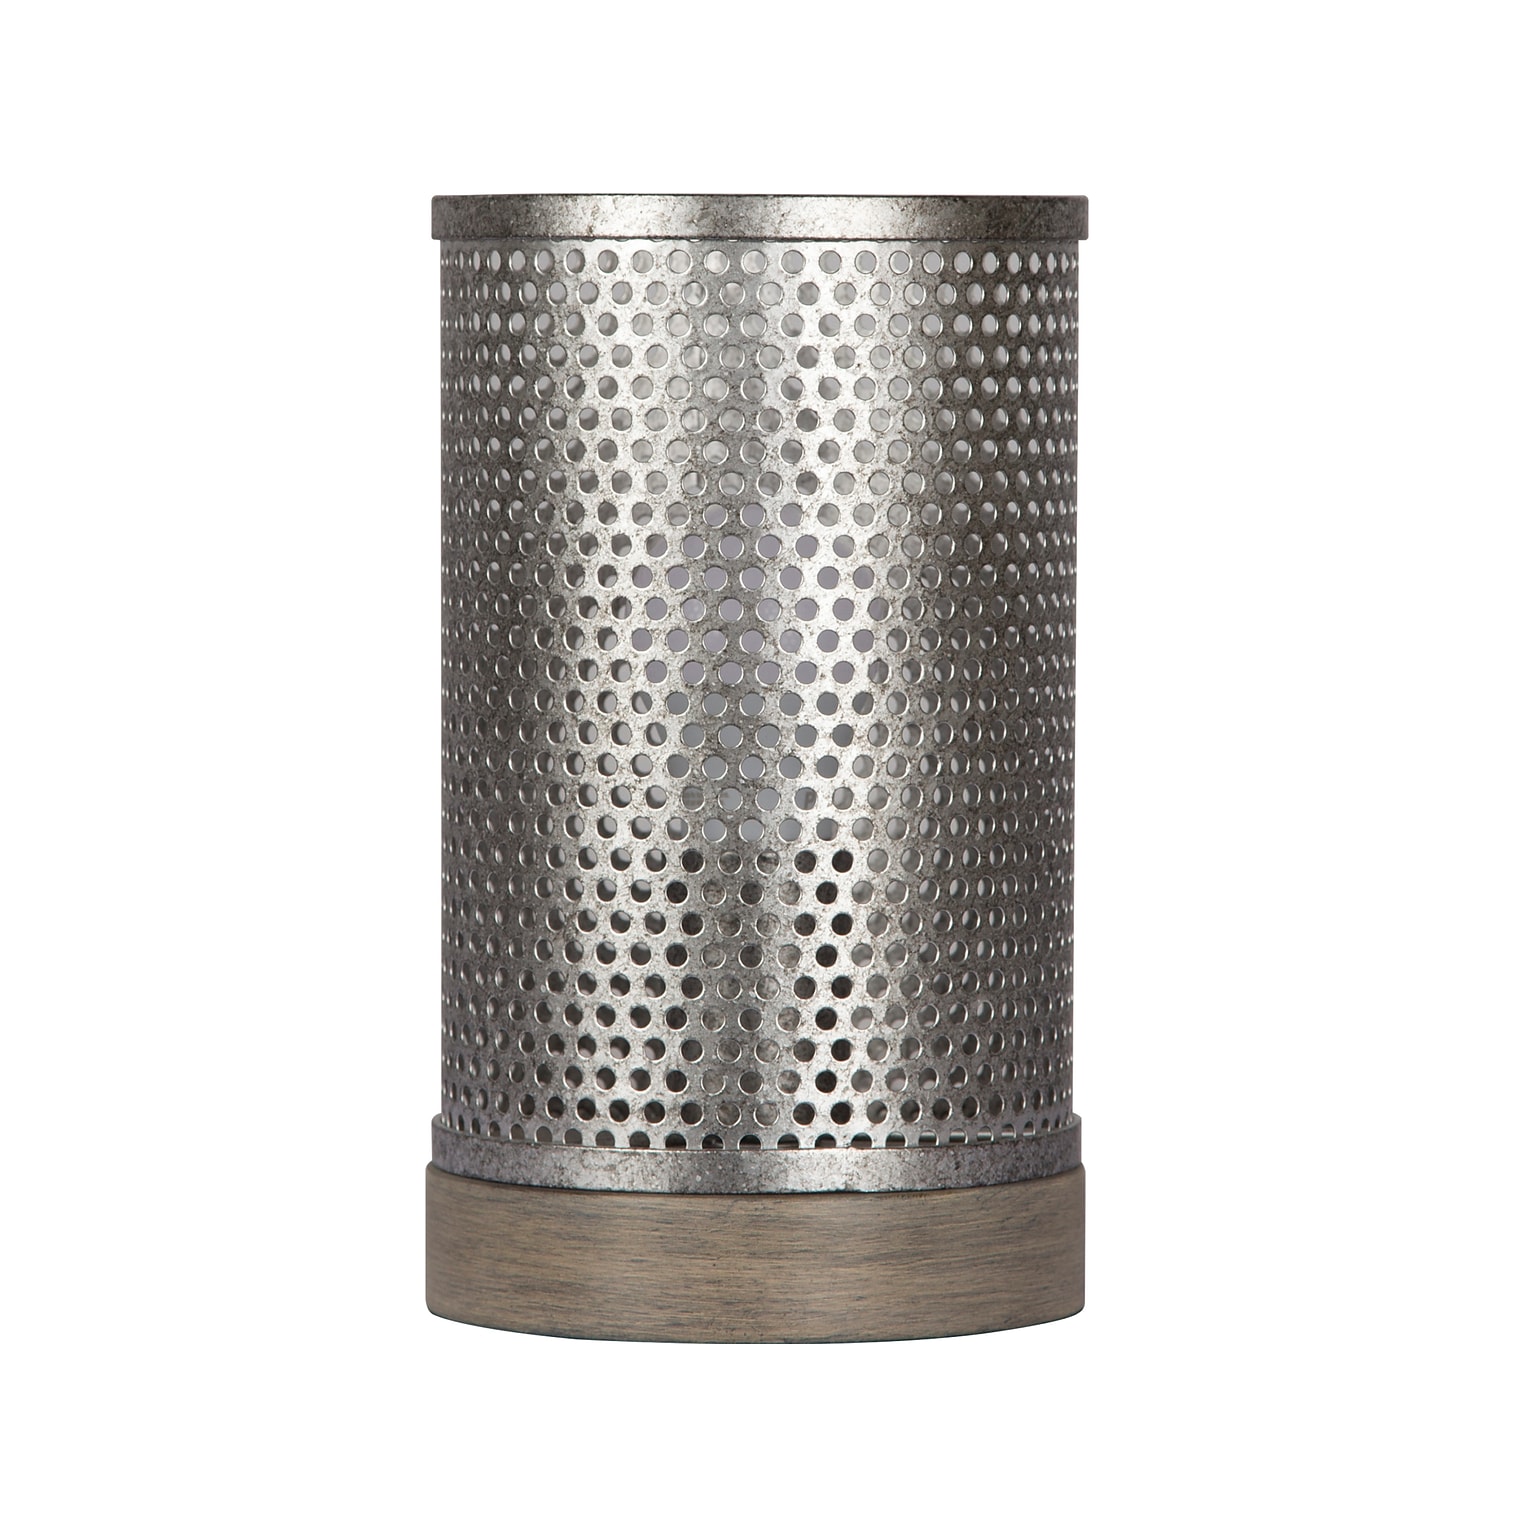 Simplee Adesso LED Table Lantern, Galvanized Steel/Washed Wood (SL3701-22)